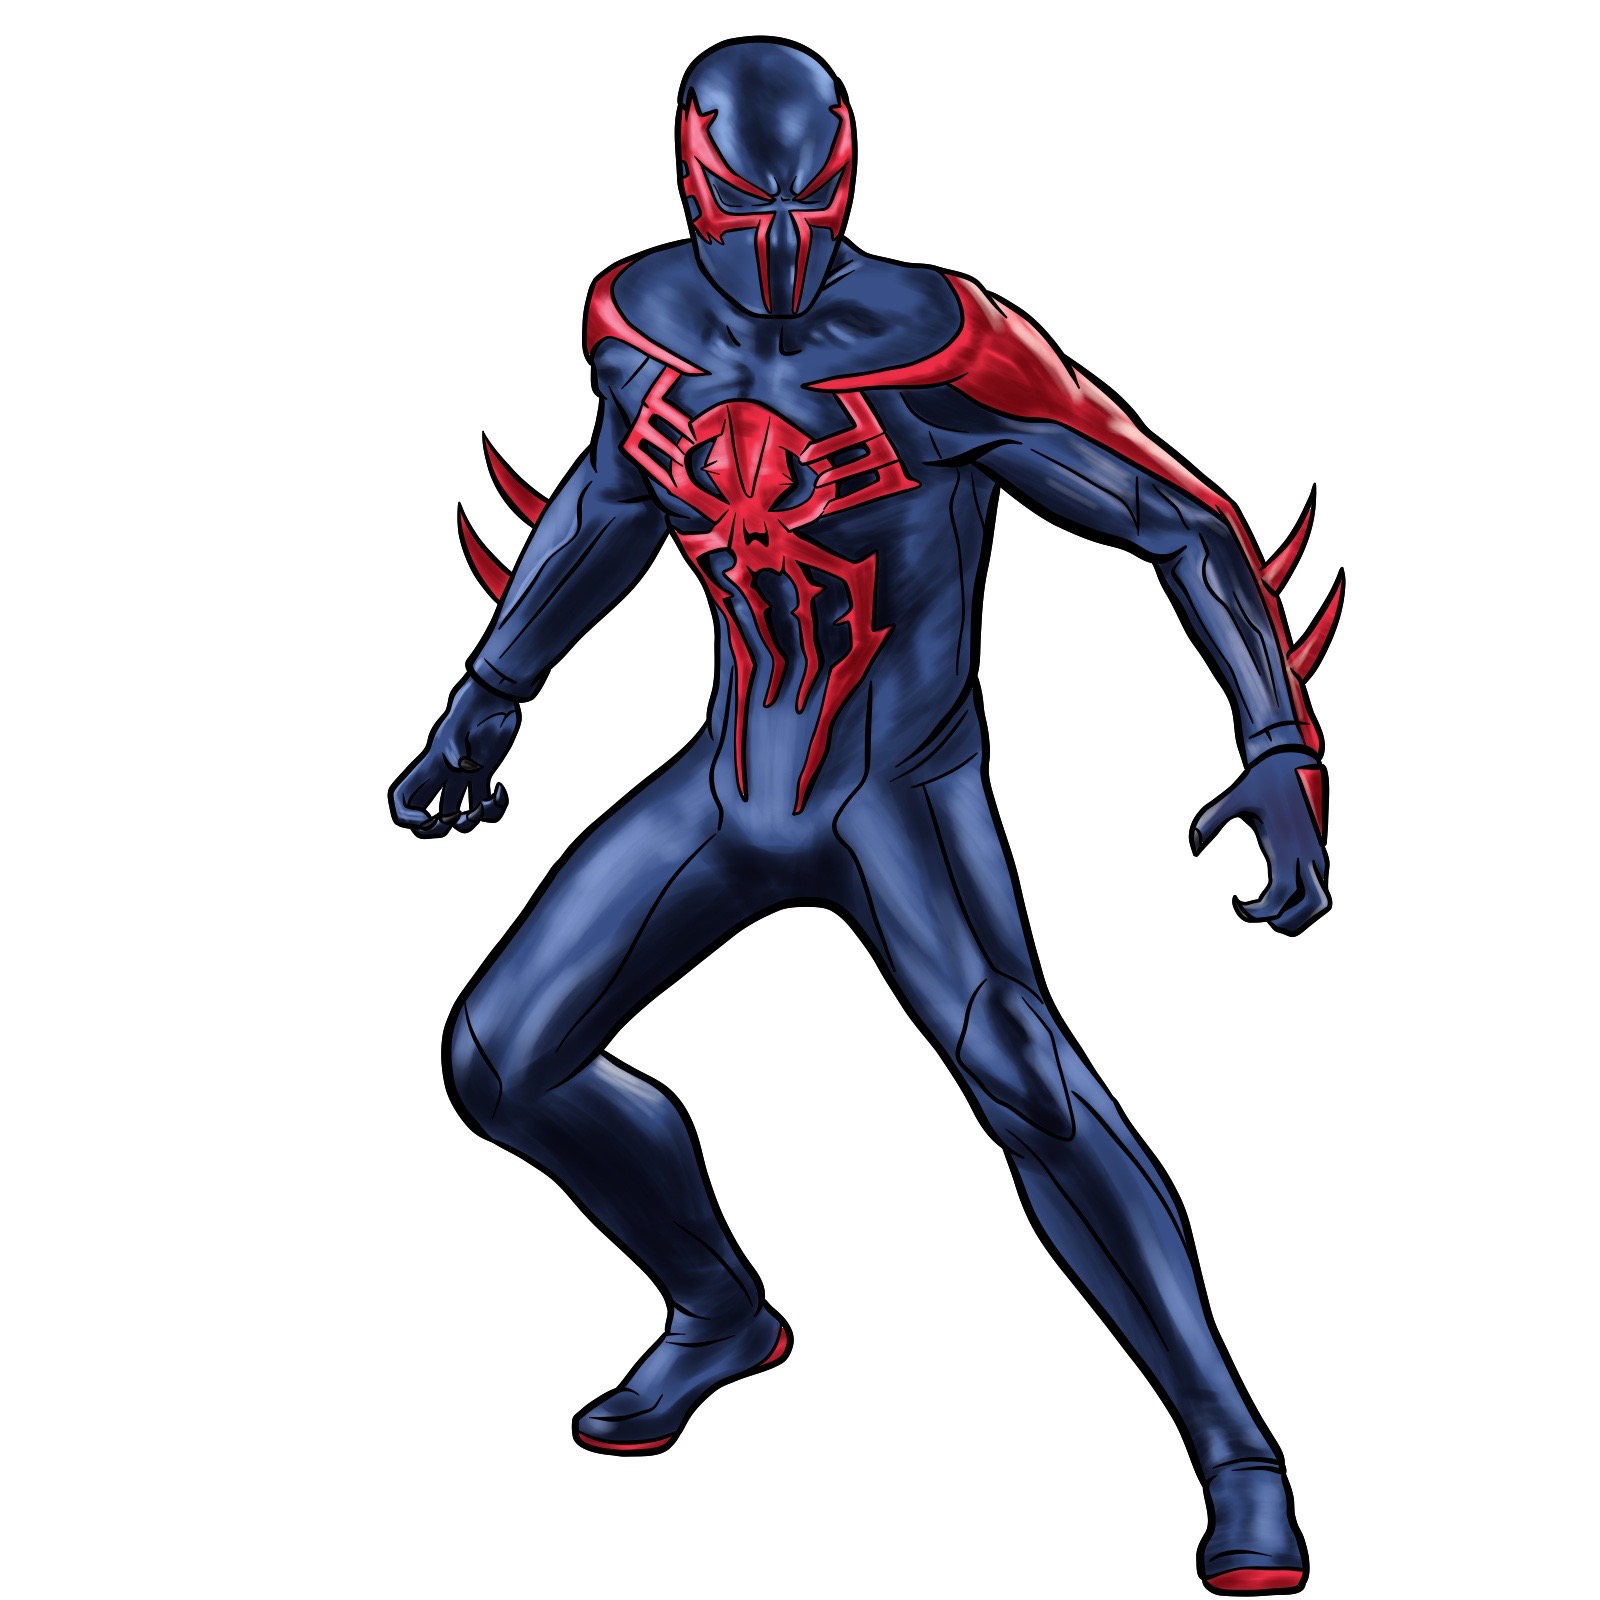 How to draw Spider-Man 2099